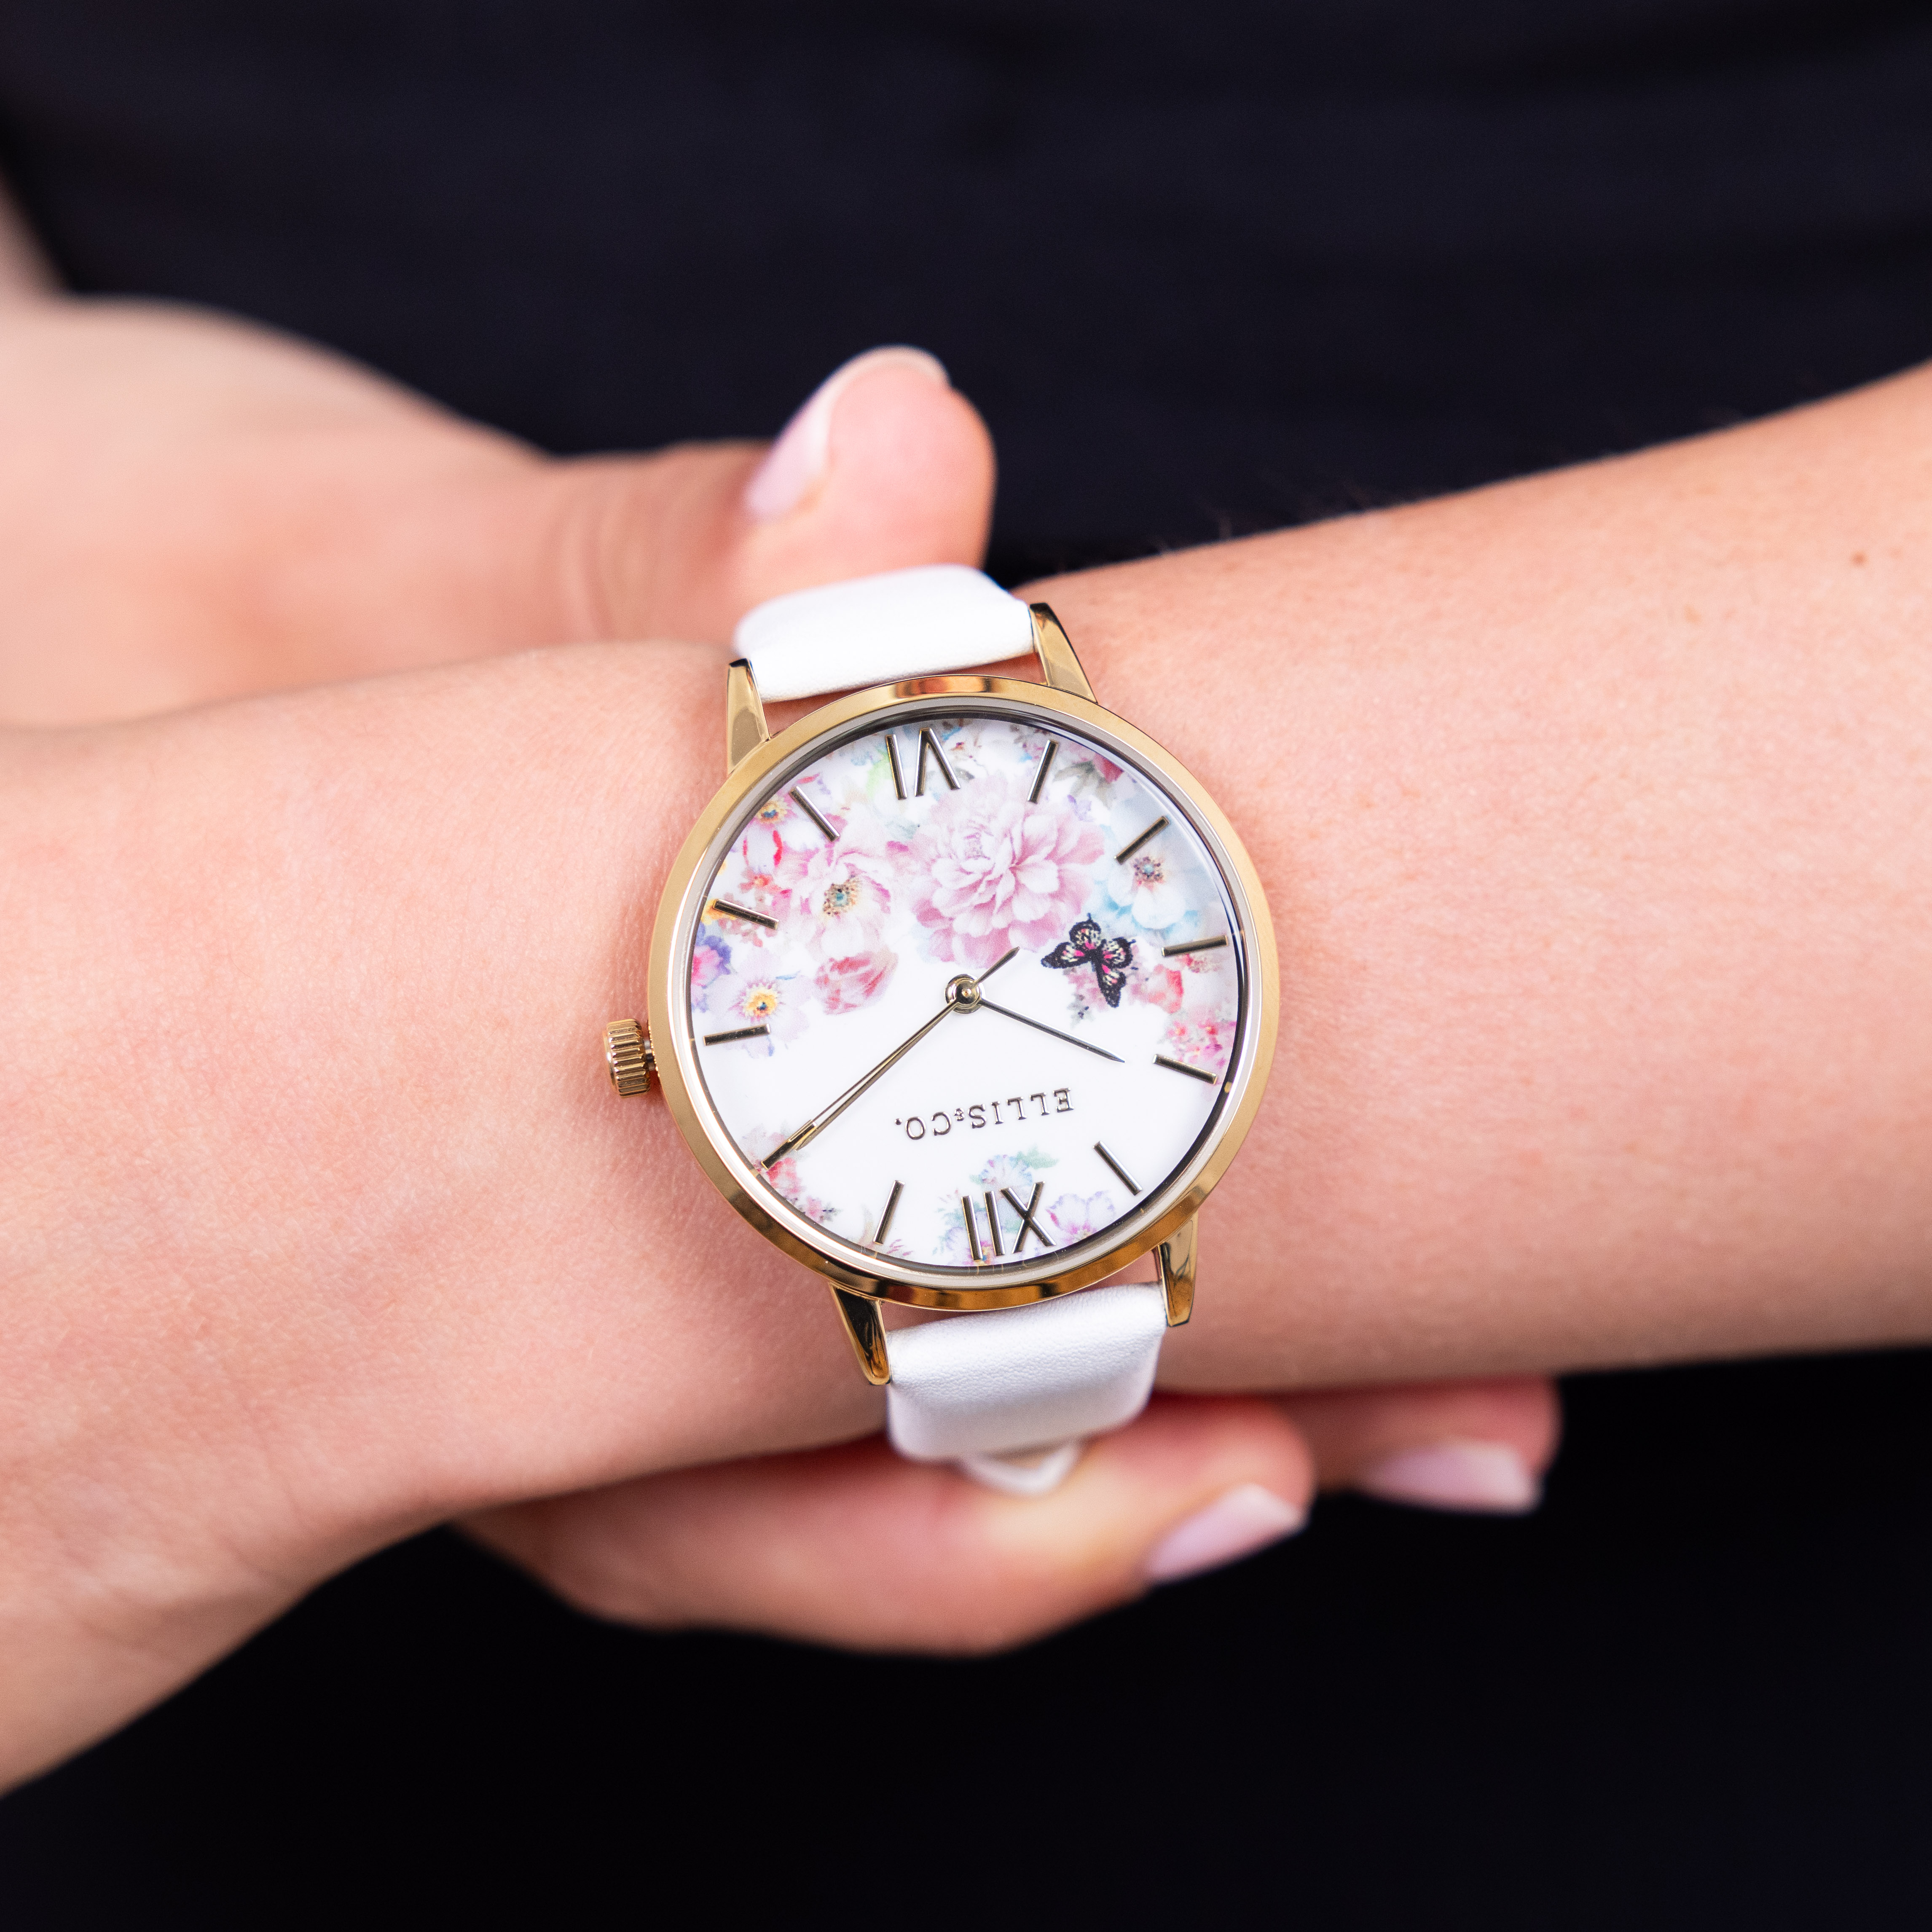 Ellis & Co 'Bloom' White Leather Floral Womens Watch